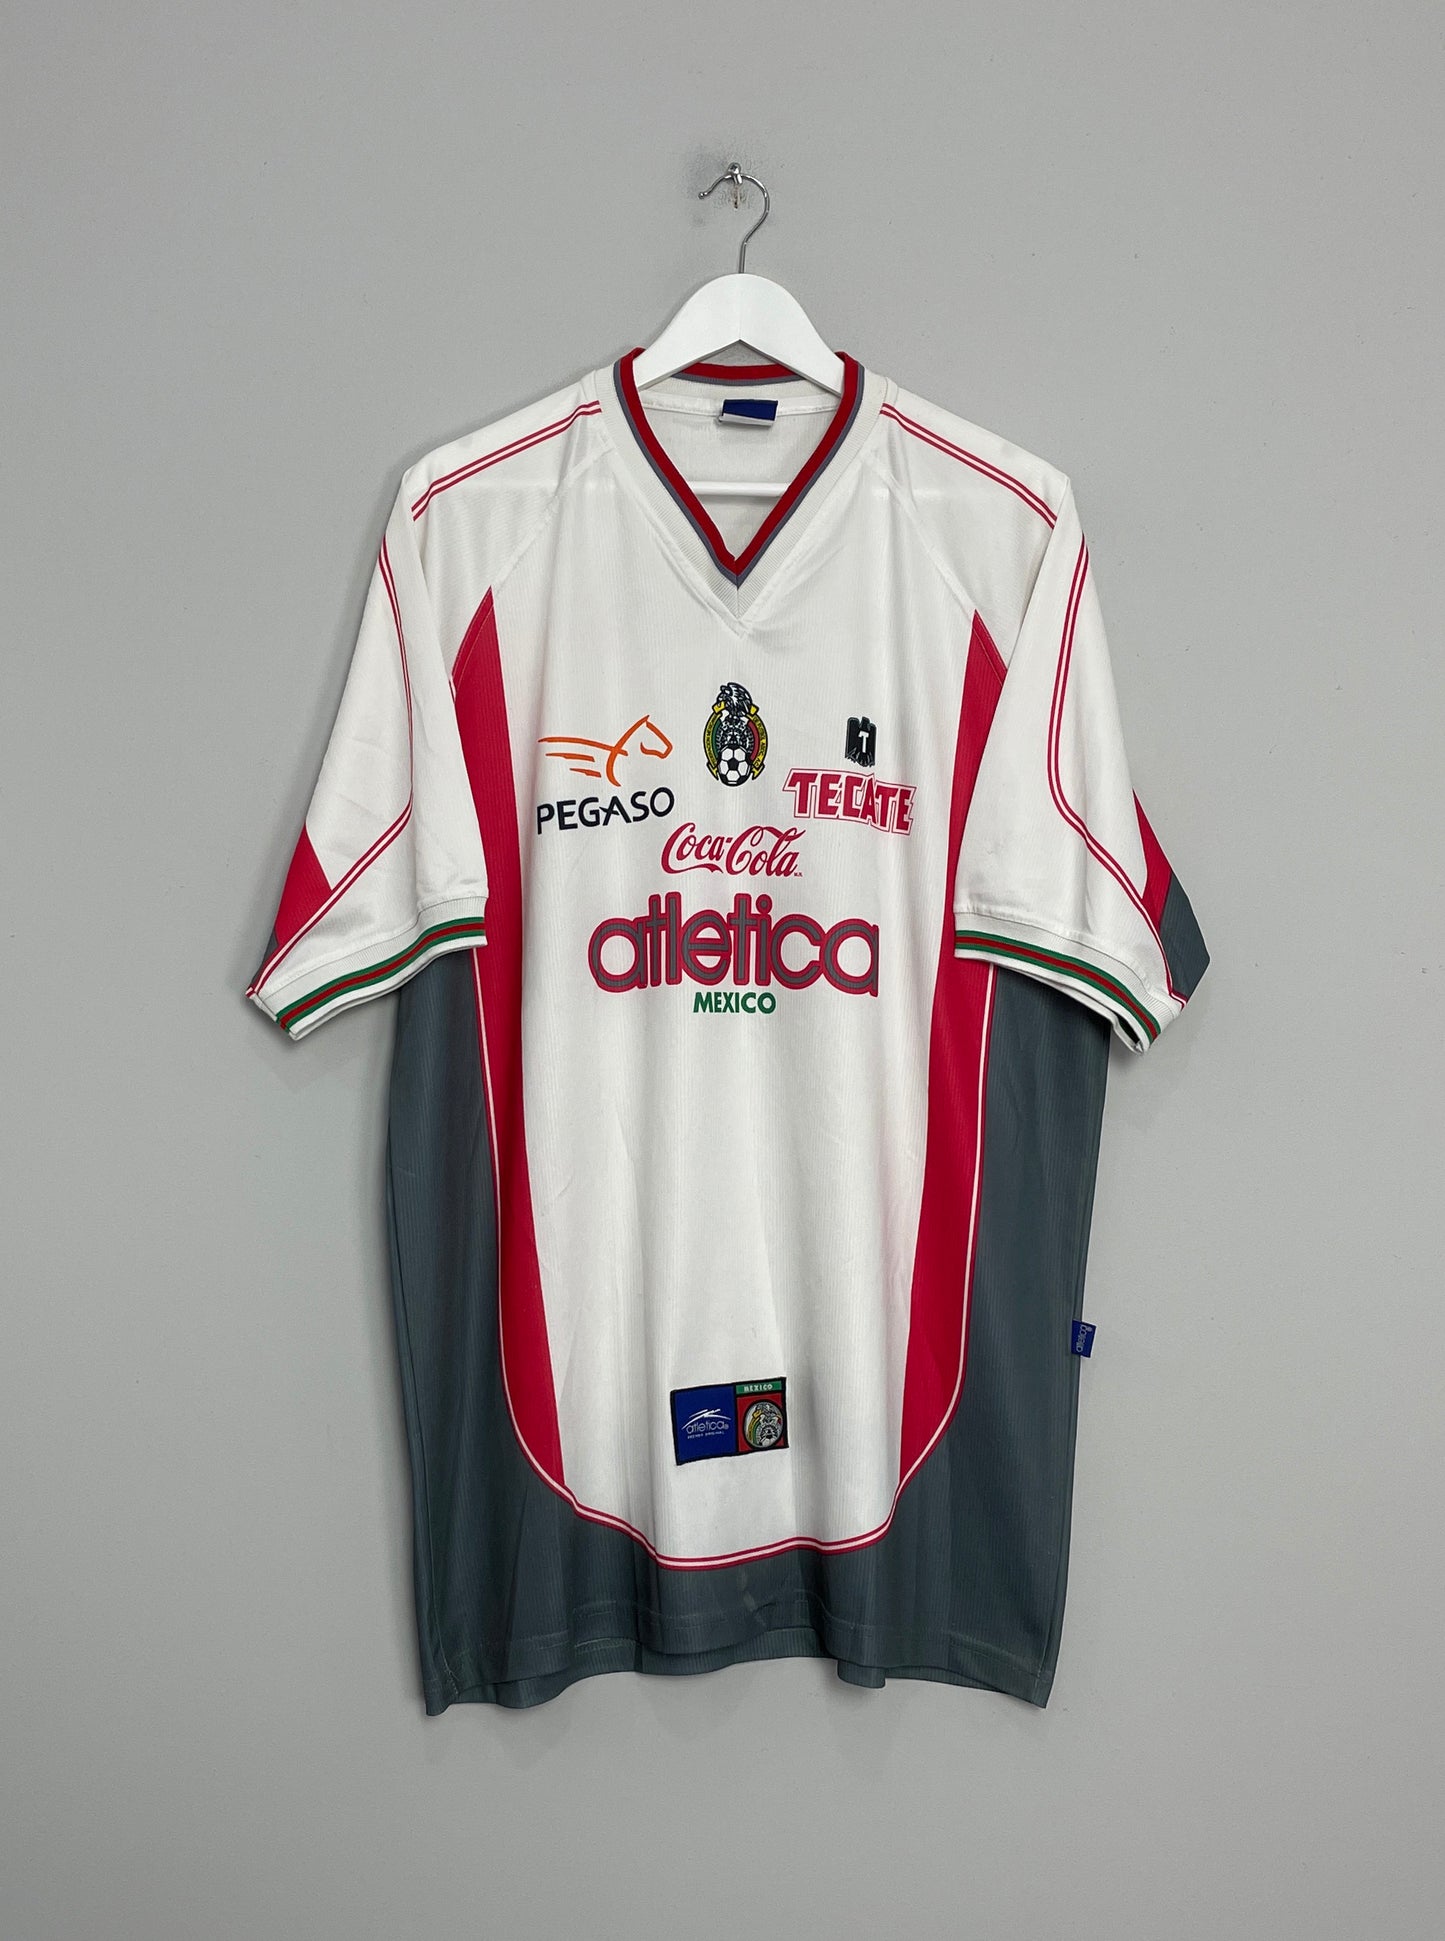 Image of the Mexico training shirt from the 2000/01 season